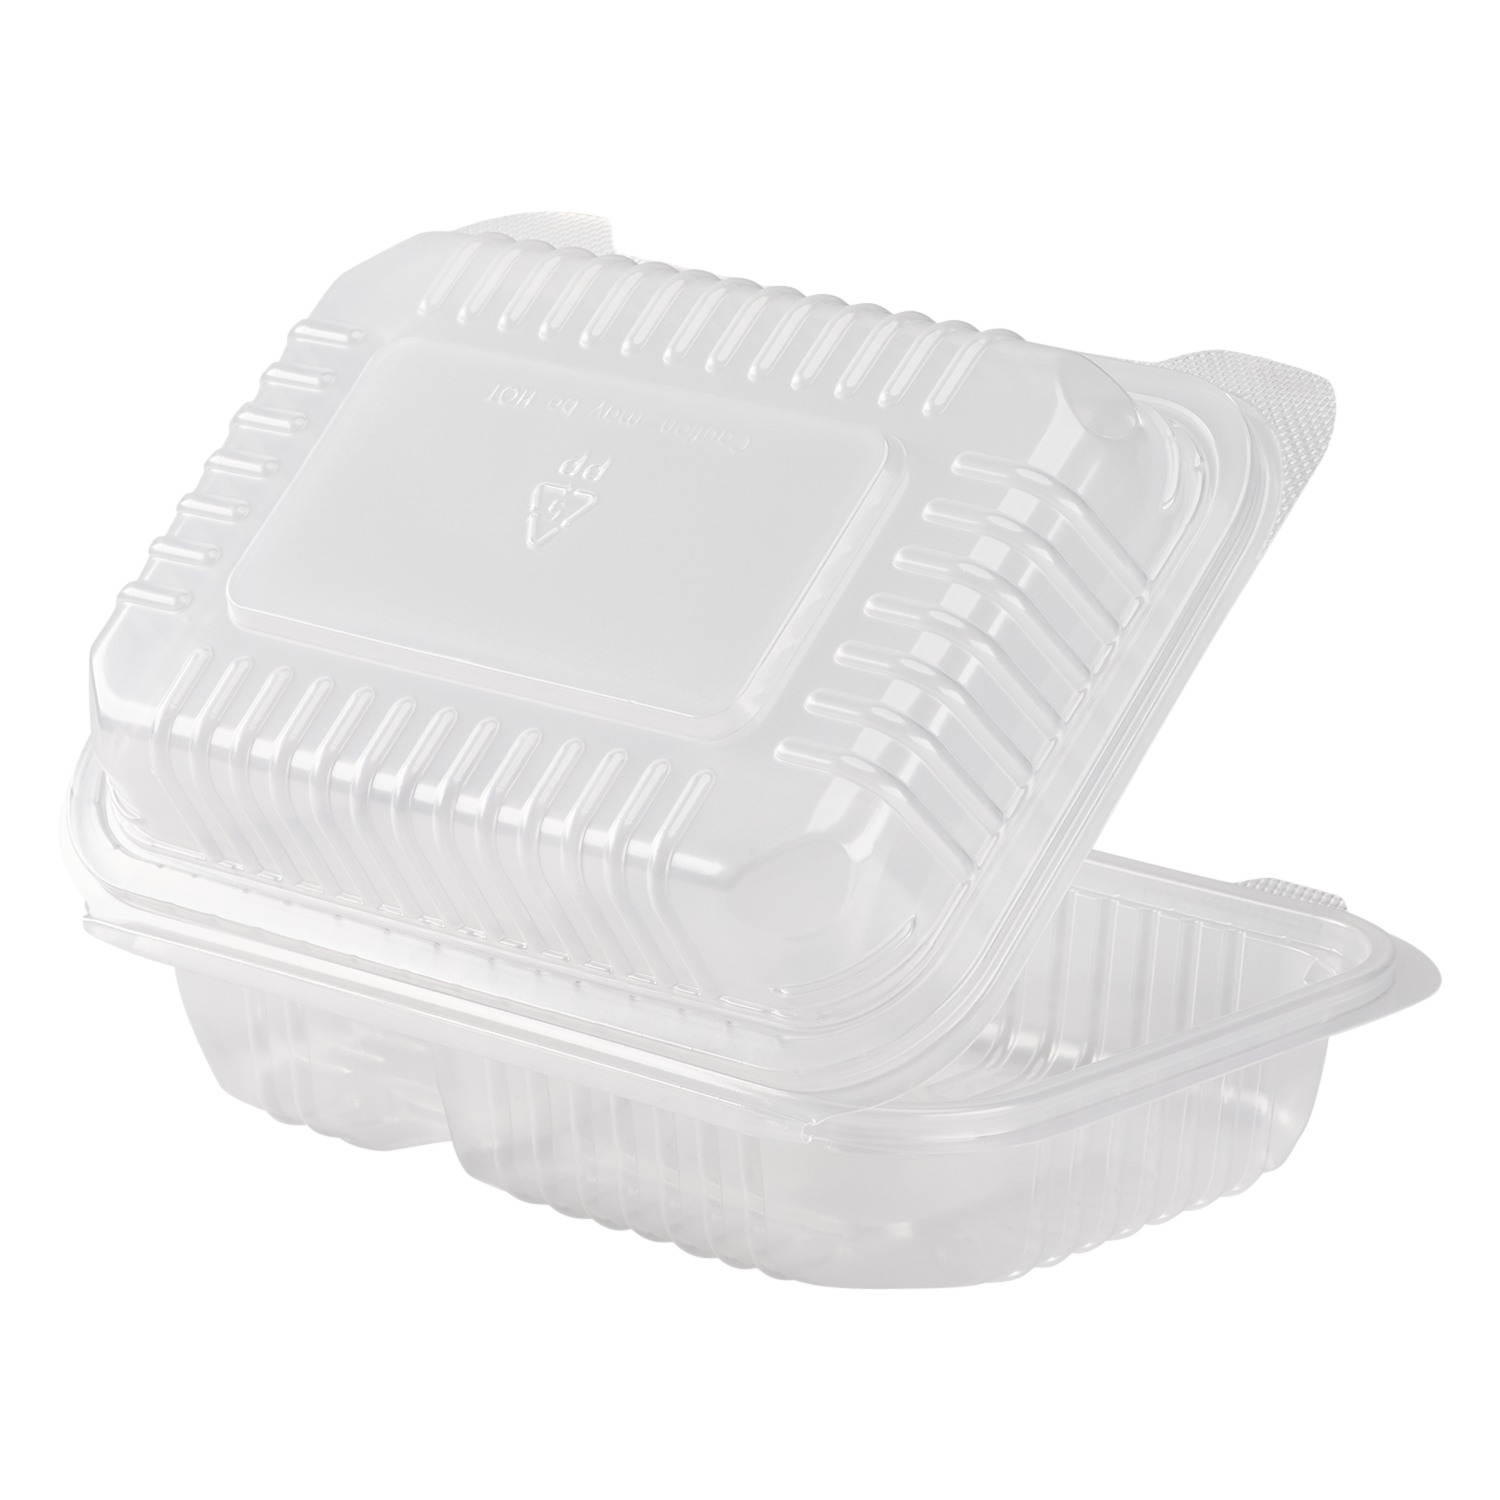 2 Compartment Clamshell Food Container - 9x6 Divided Hinged To Go Box